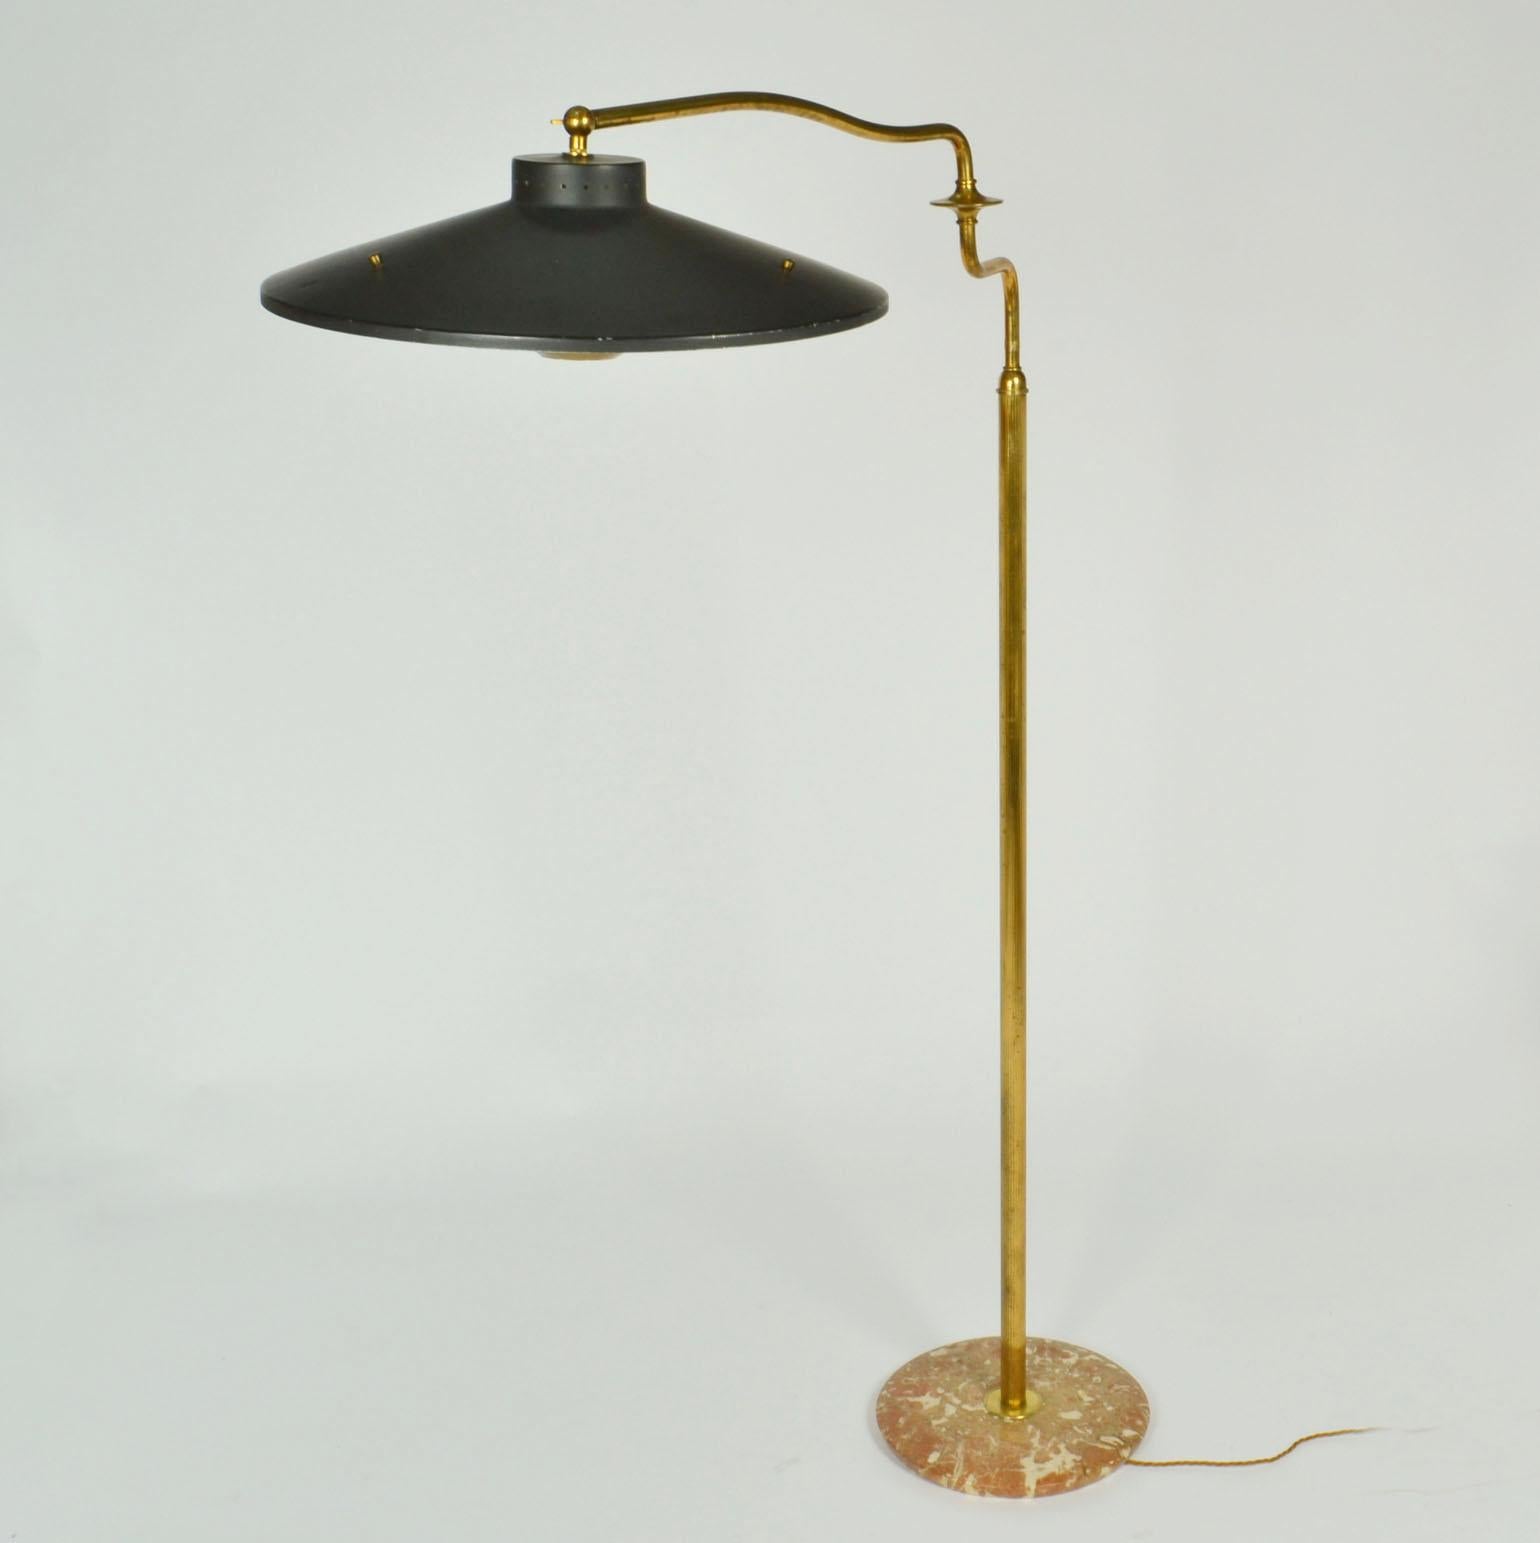 The articulated Italian swing arm brass floor lamp is multi functional added by its extending swivel arm. The original black painted cone-shaped metal tilting shade is completed with a brass diffuser held together by three black wooded arms. The